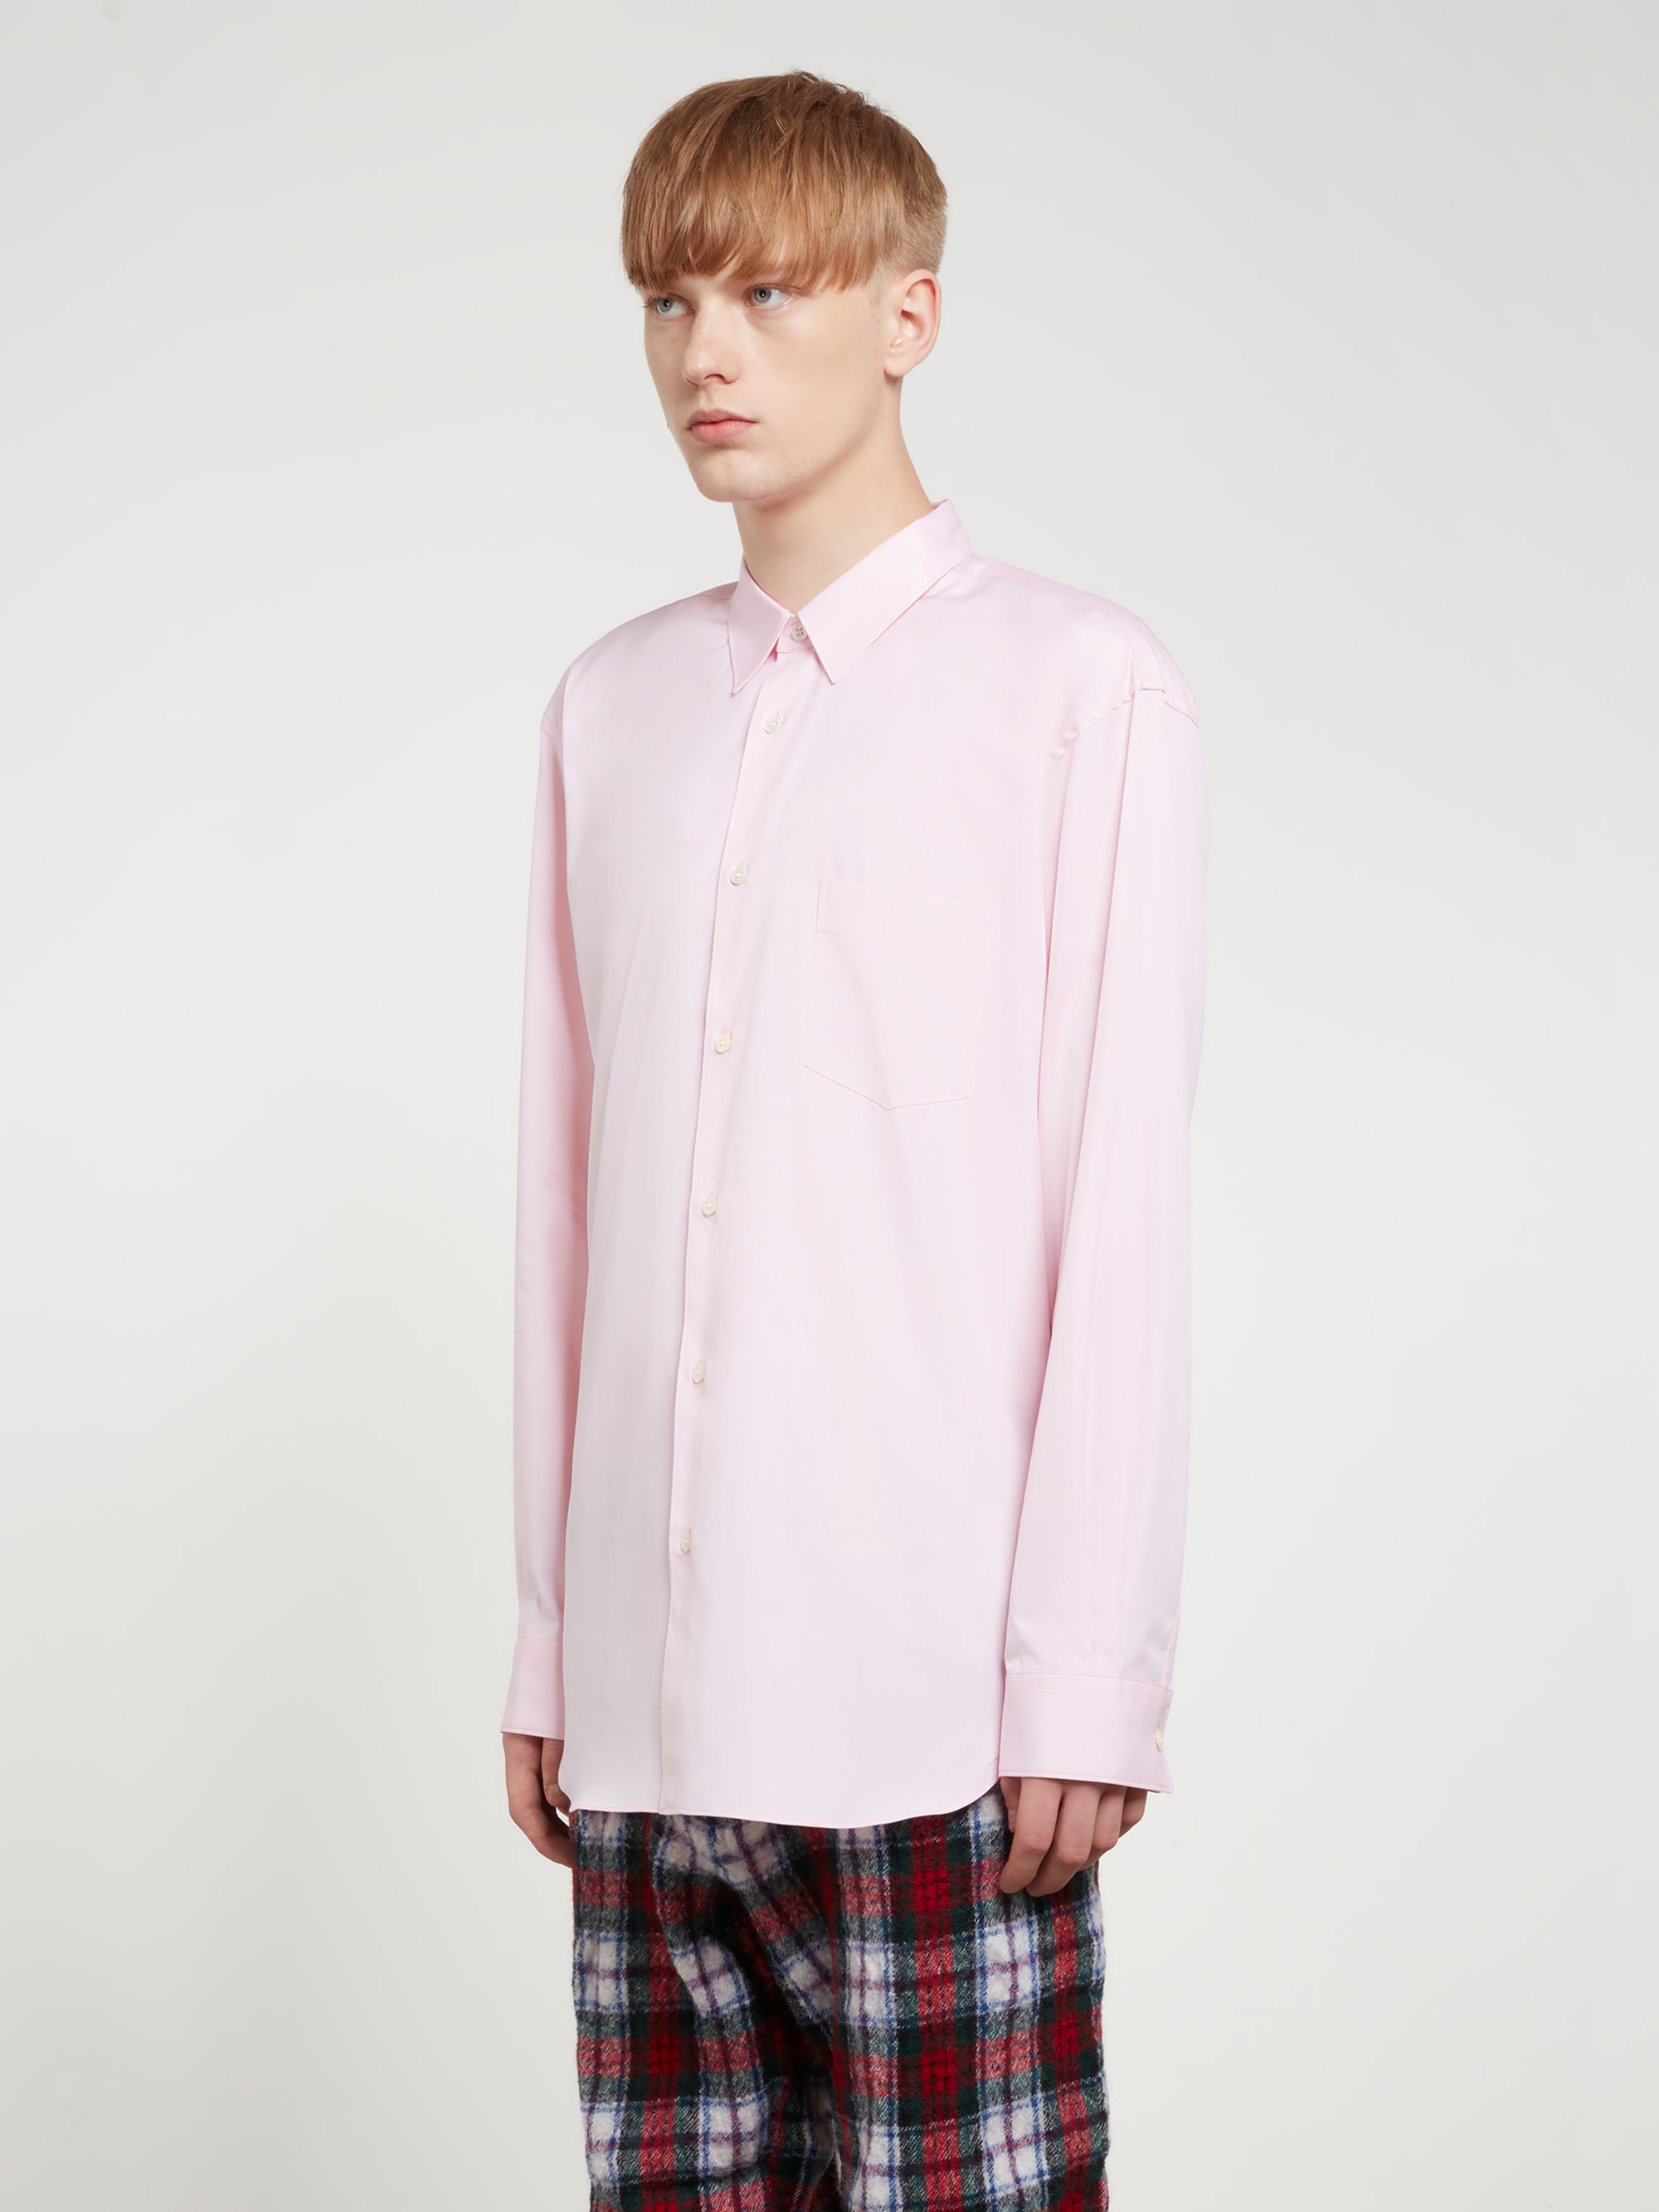 CDG Shirt Forever - Classic Fit Woven Cotton Shirt - (Pink) view 3